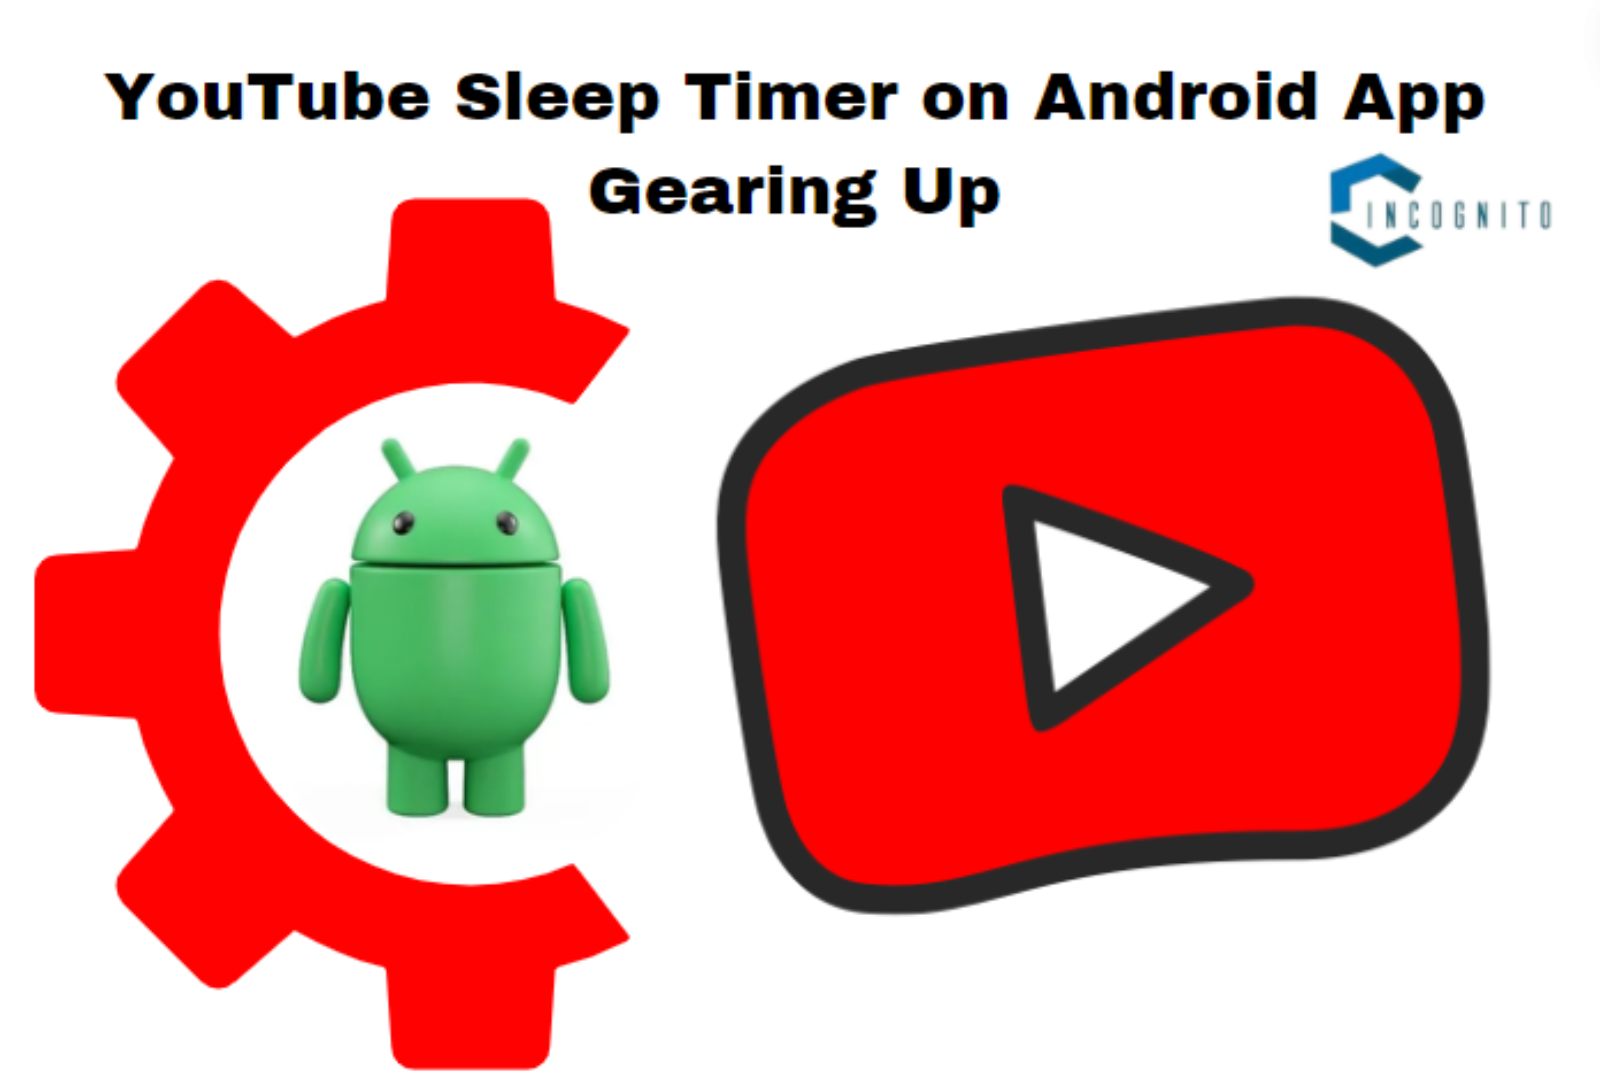 YouTube Sleep Timer on Android App Gearing Up